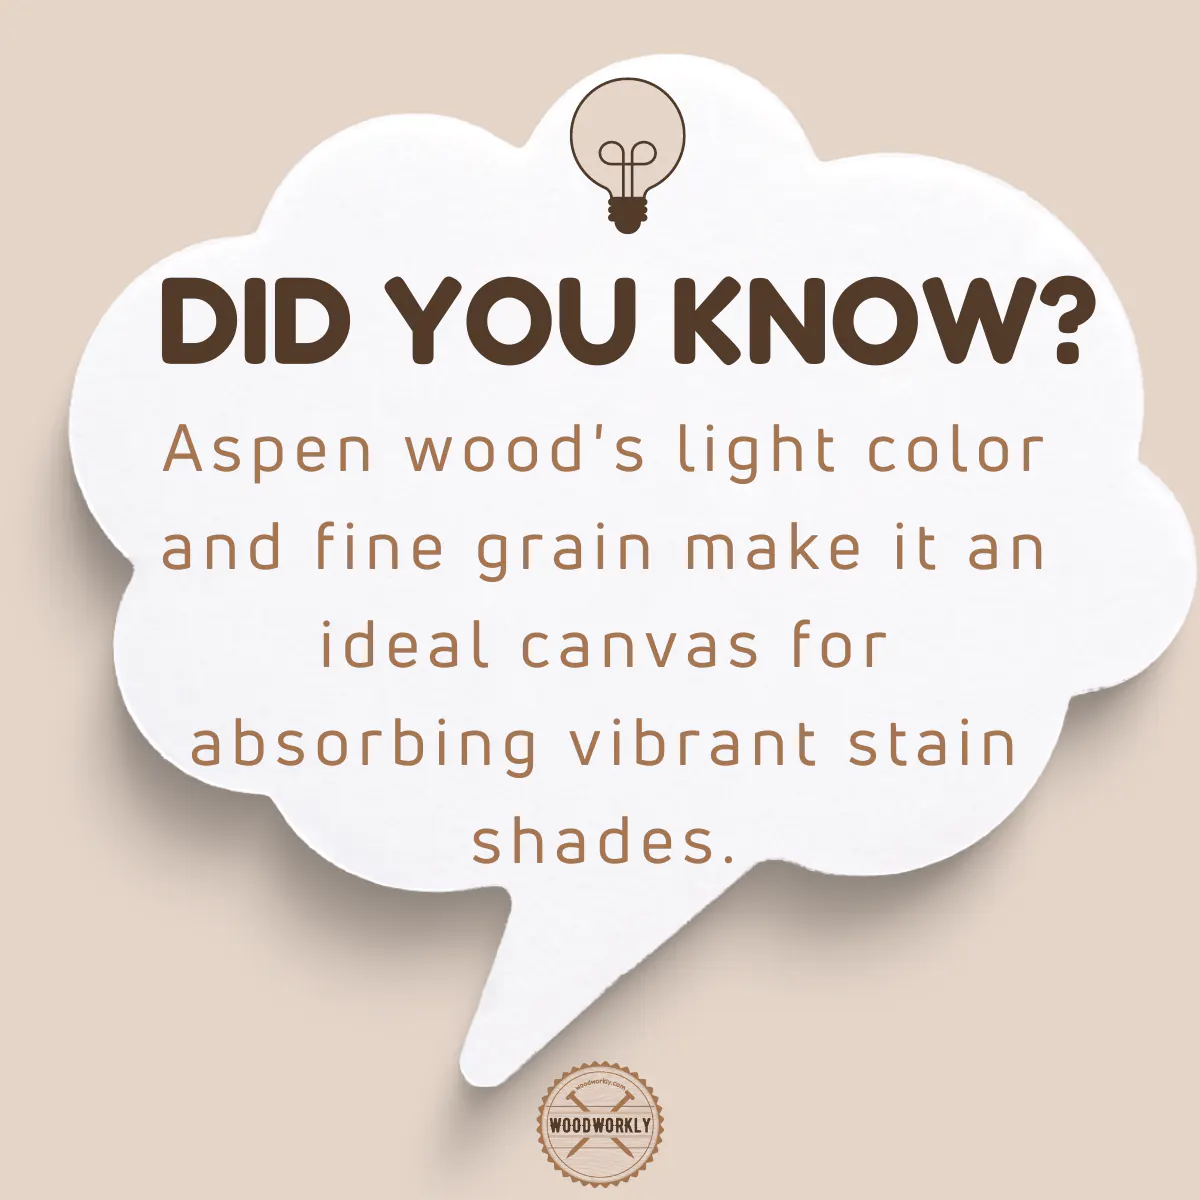 Did you know fact about staining aspen wood